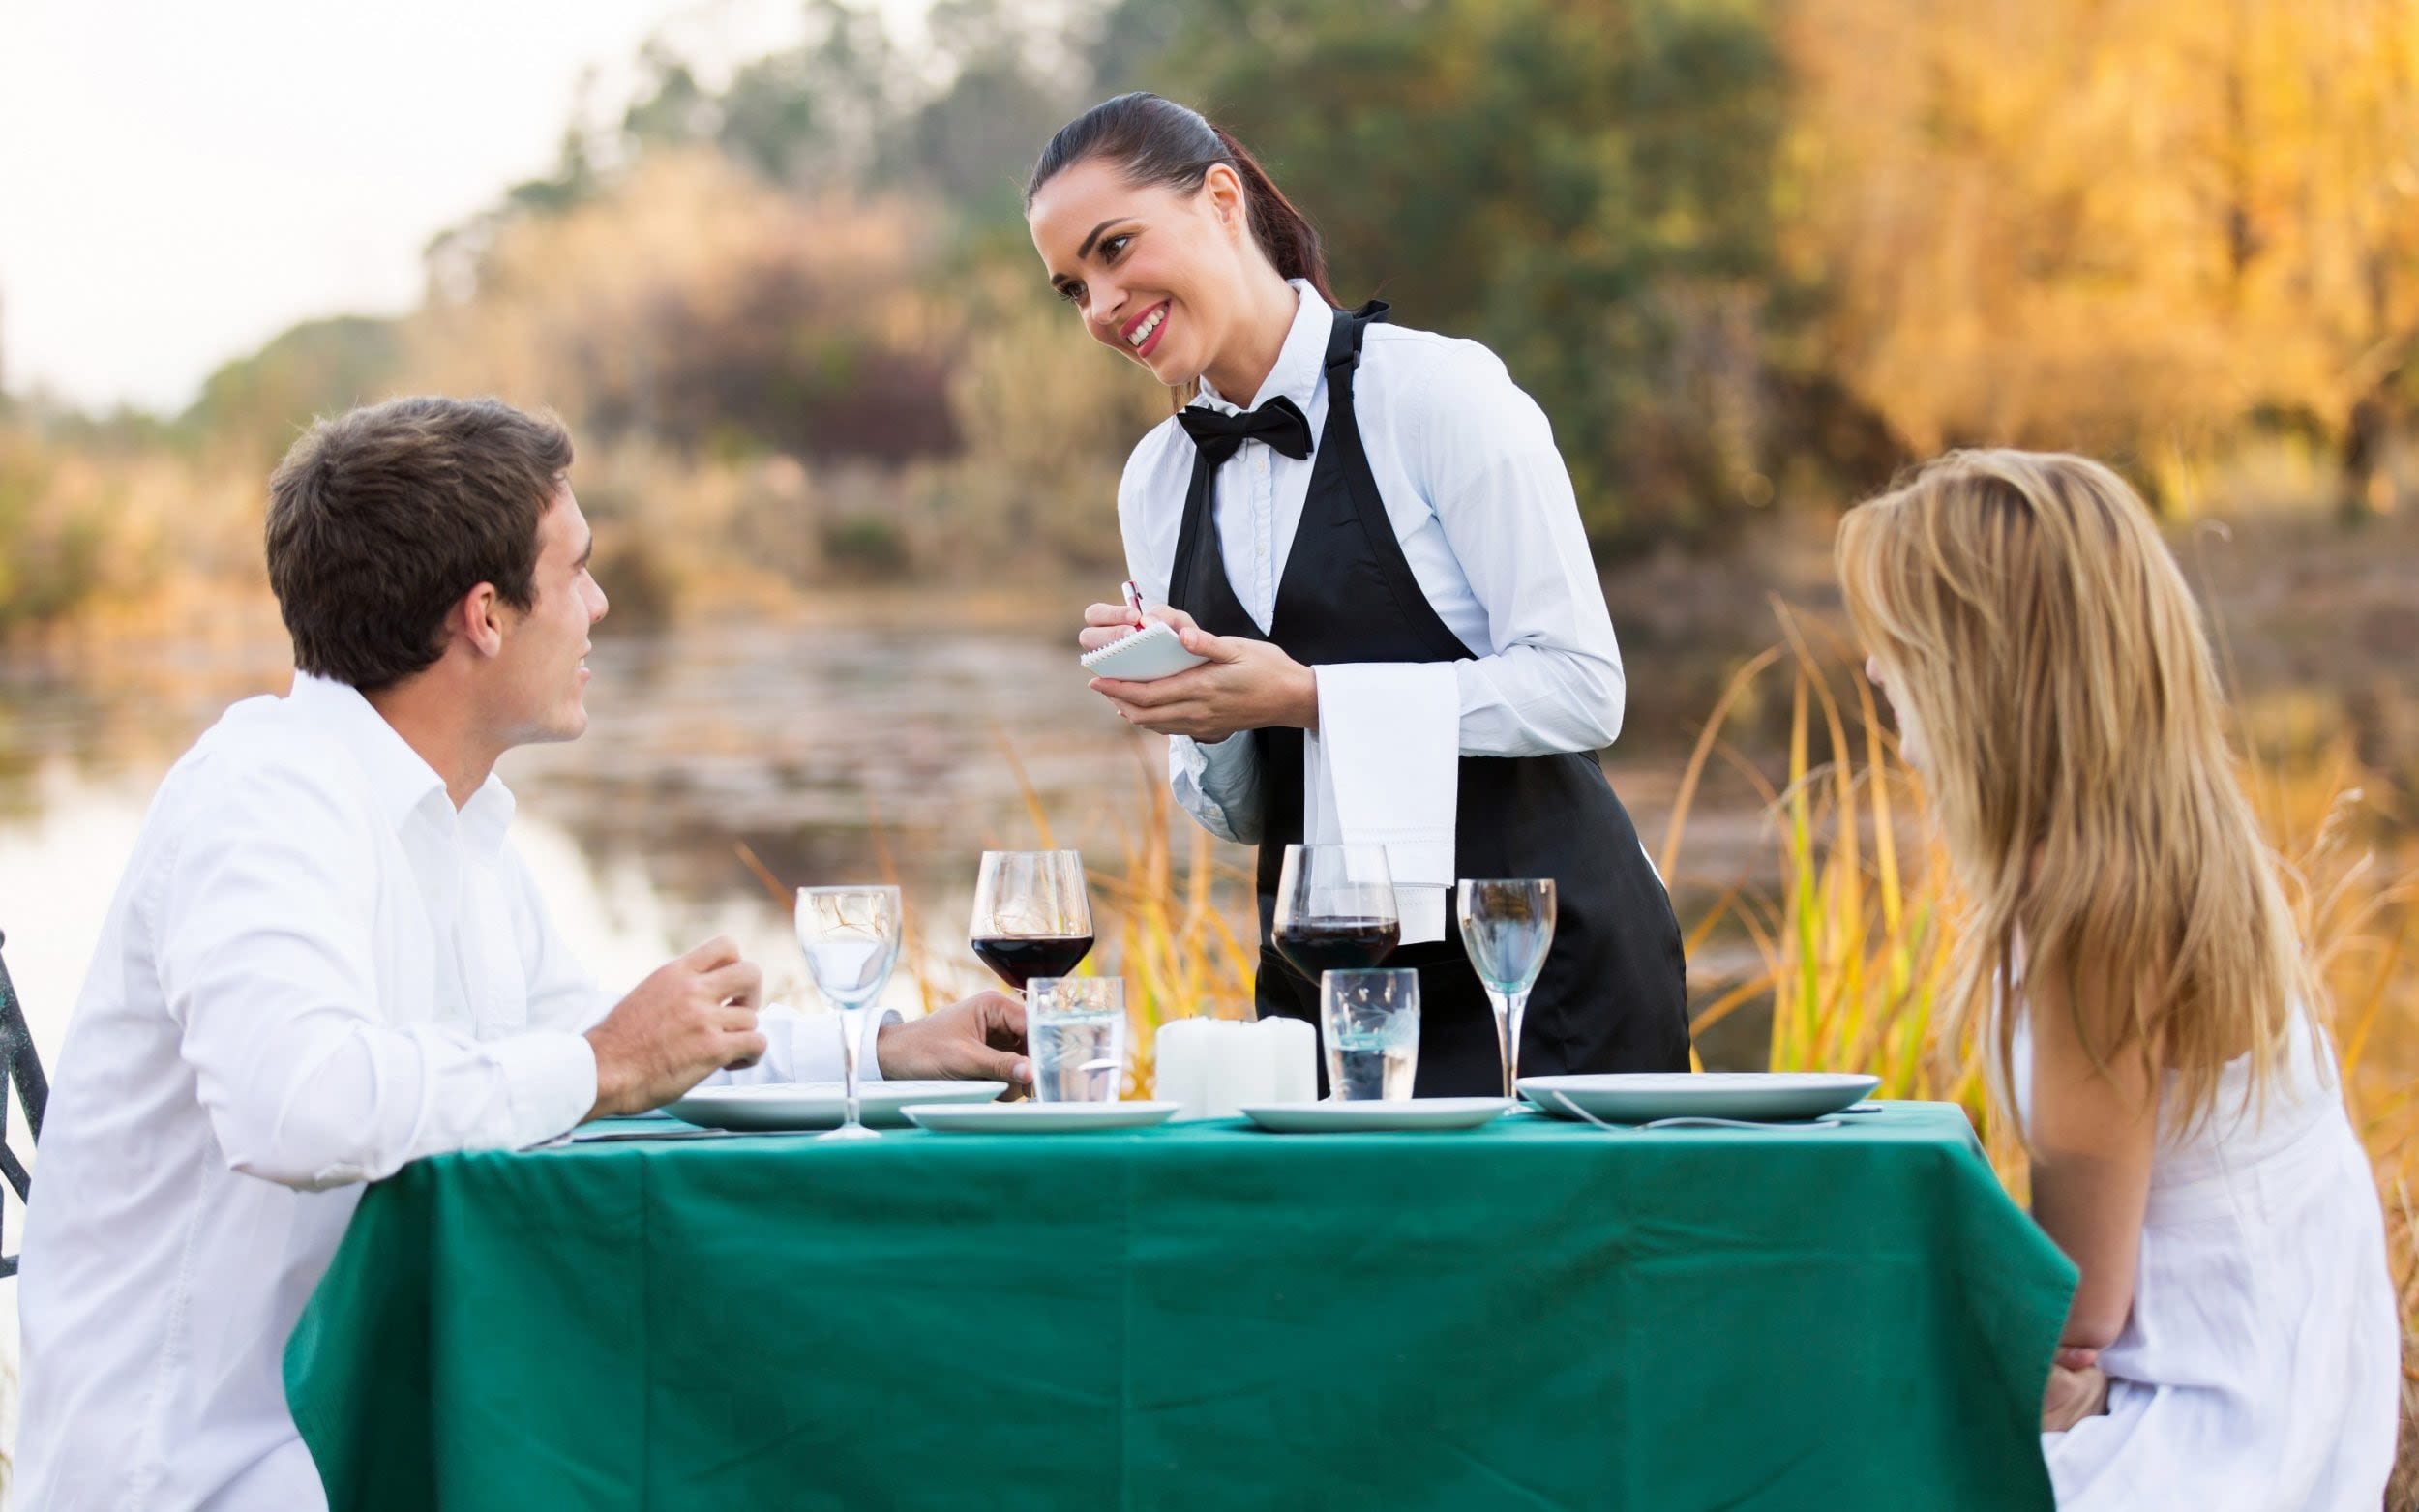 Restaurants want British waiting staff. They just can’t get them